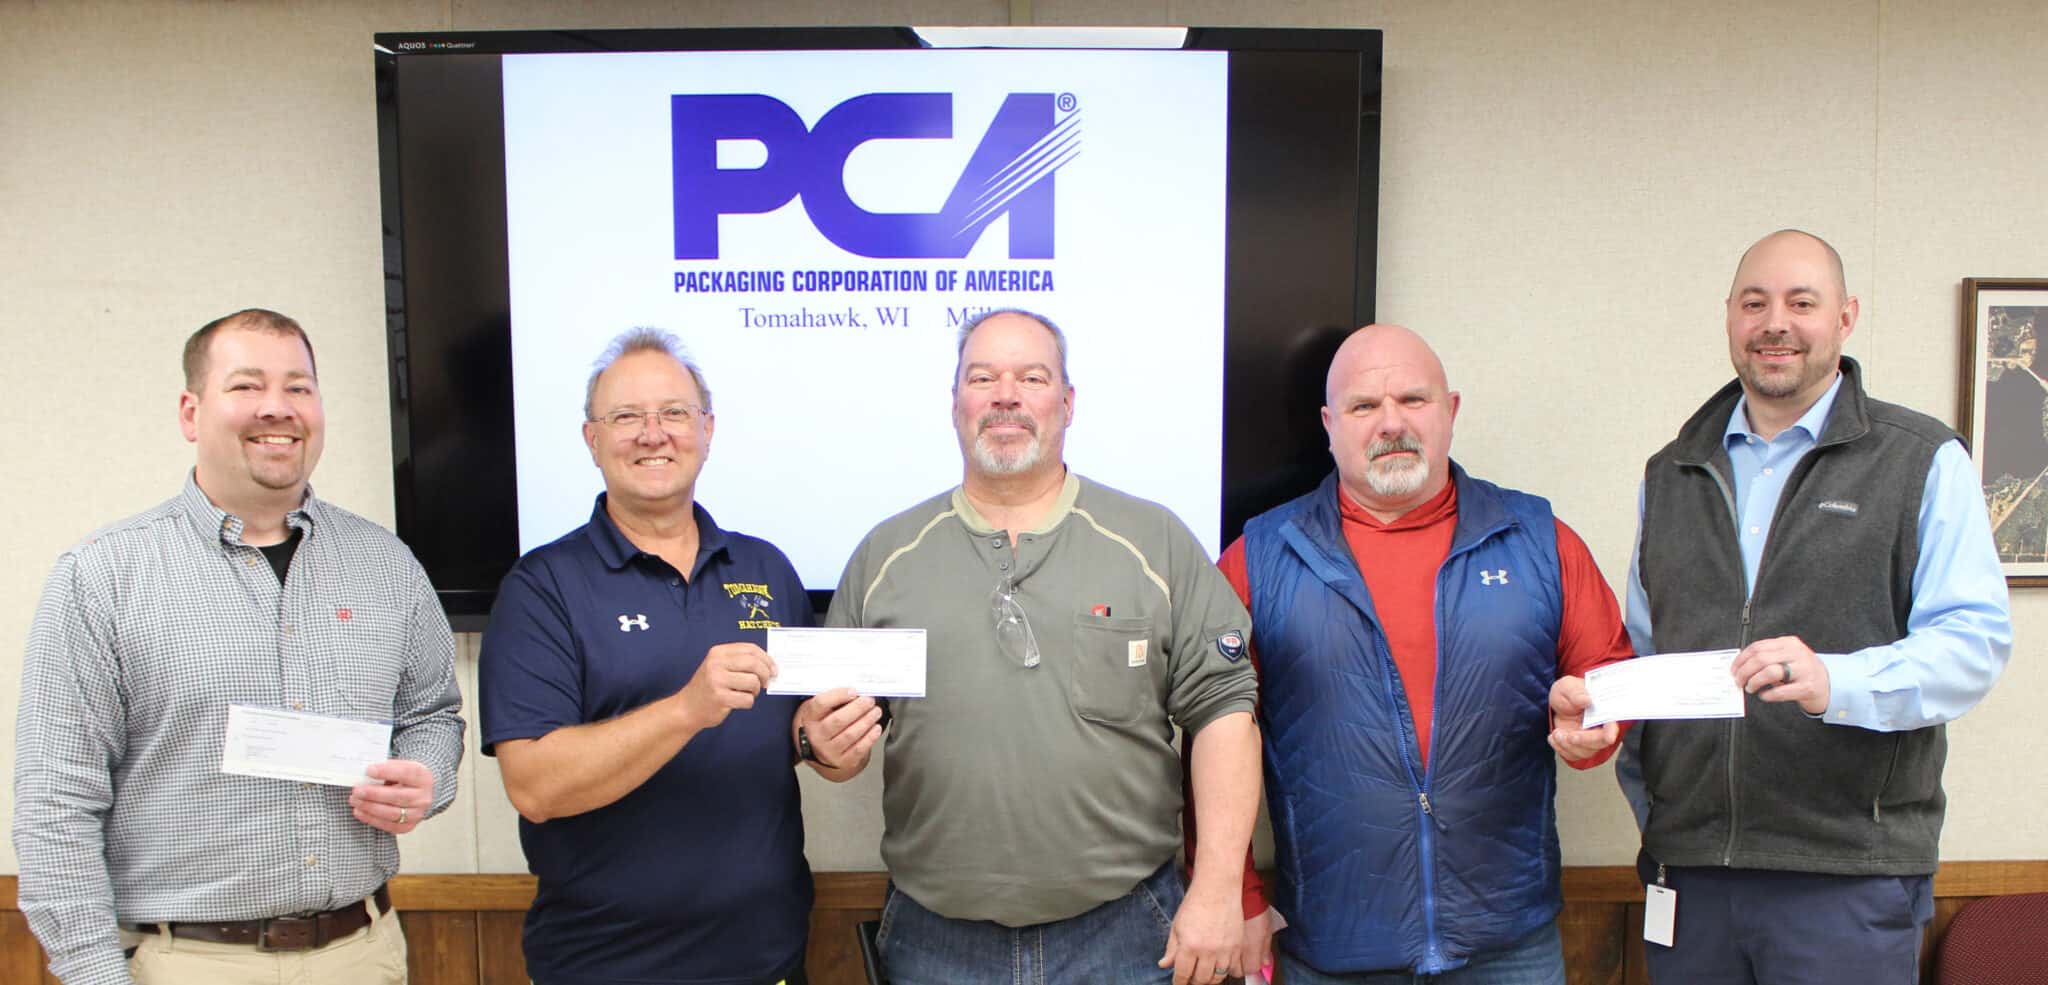 PCA donation covers costs for two AEDs at Tomahawk school complex